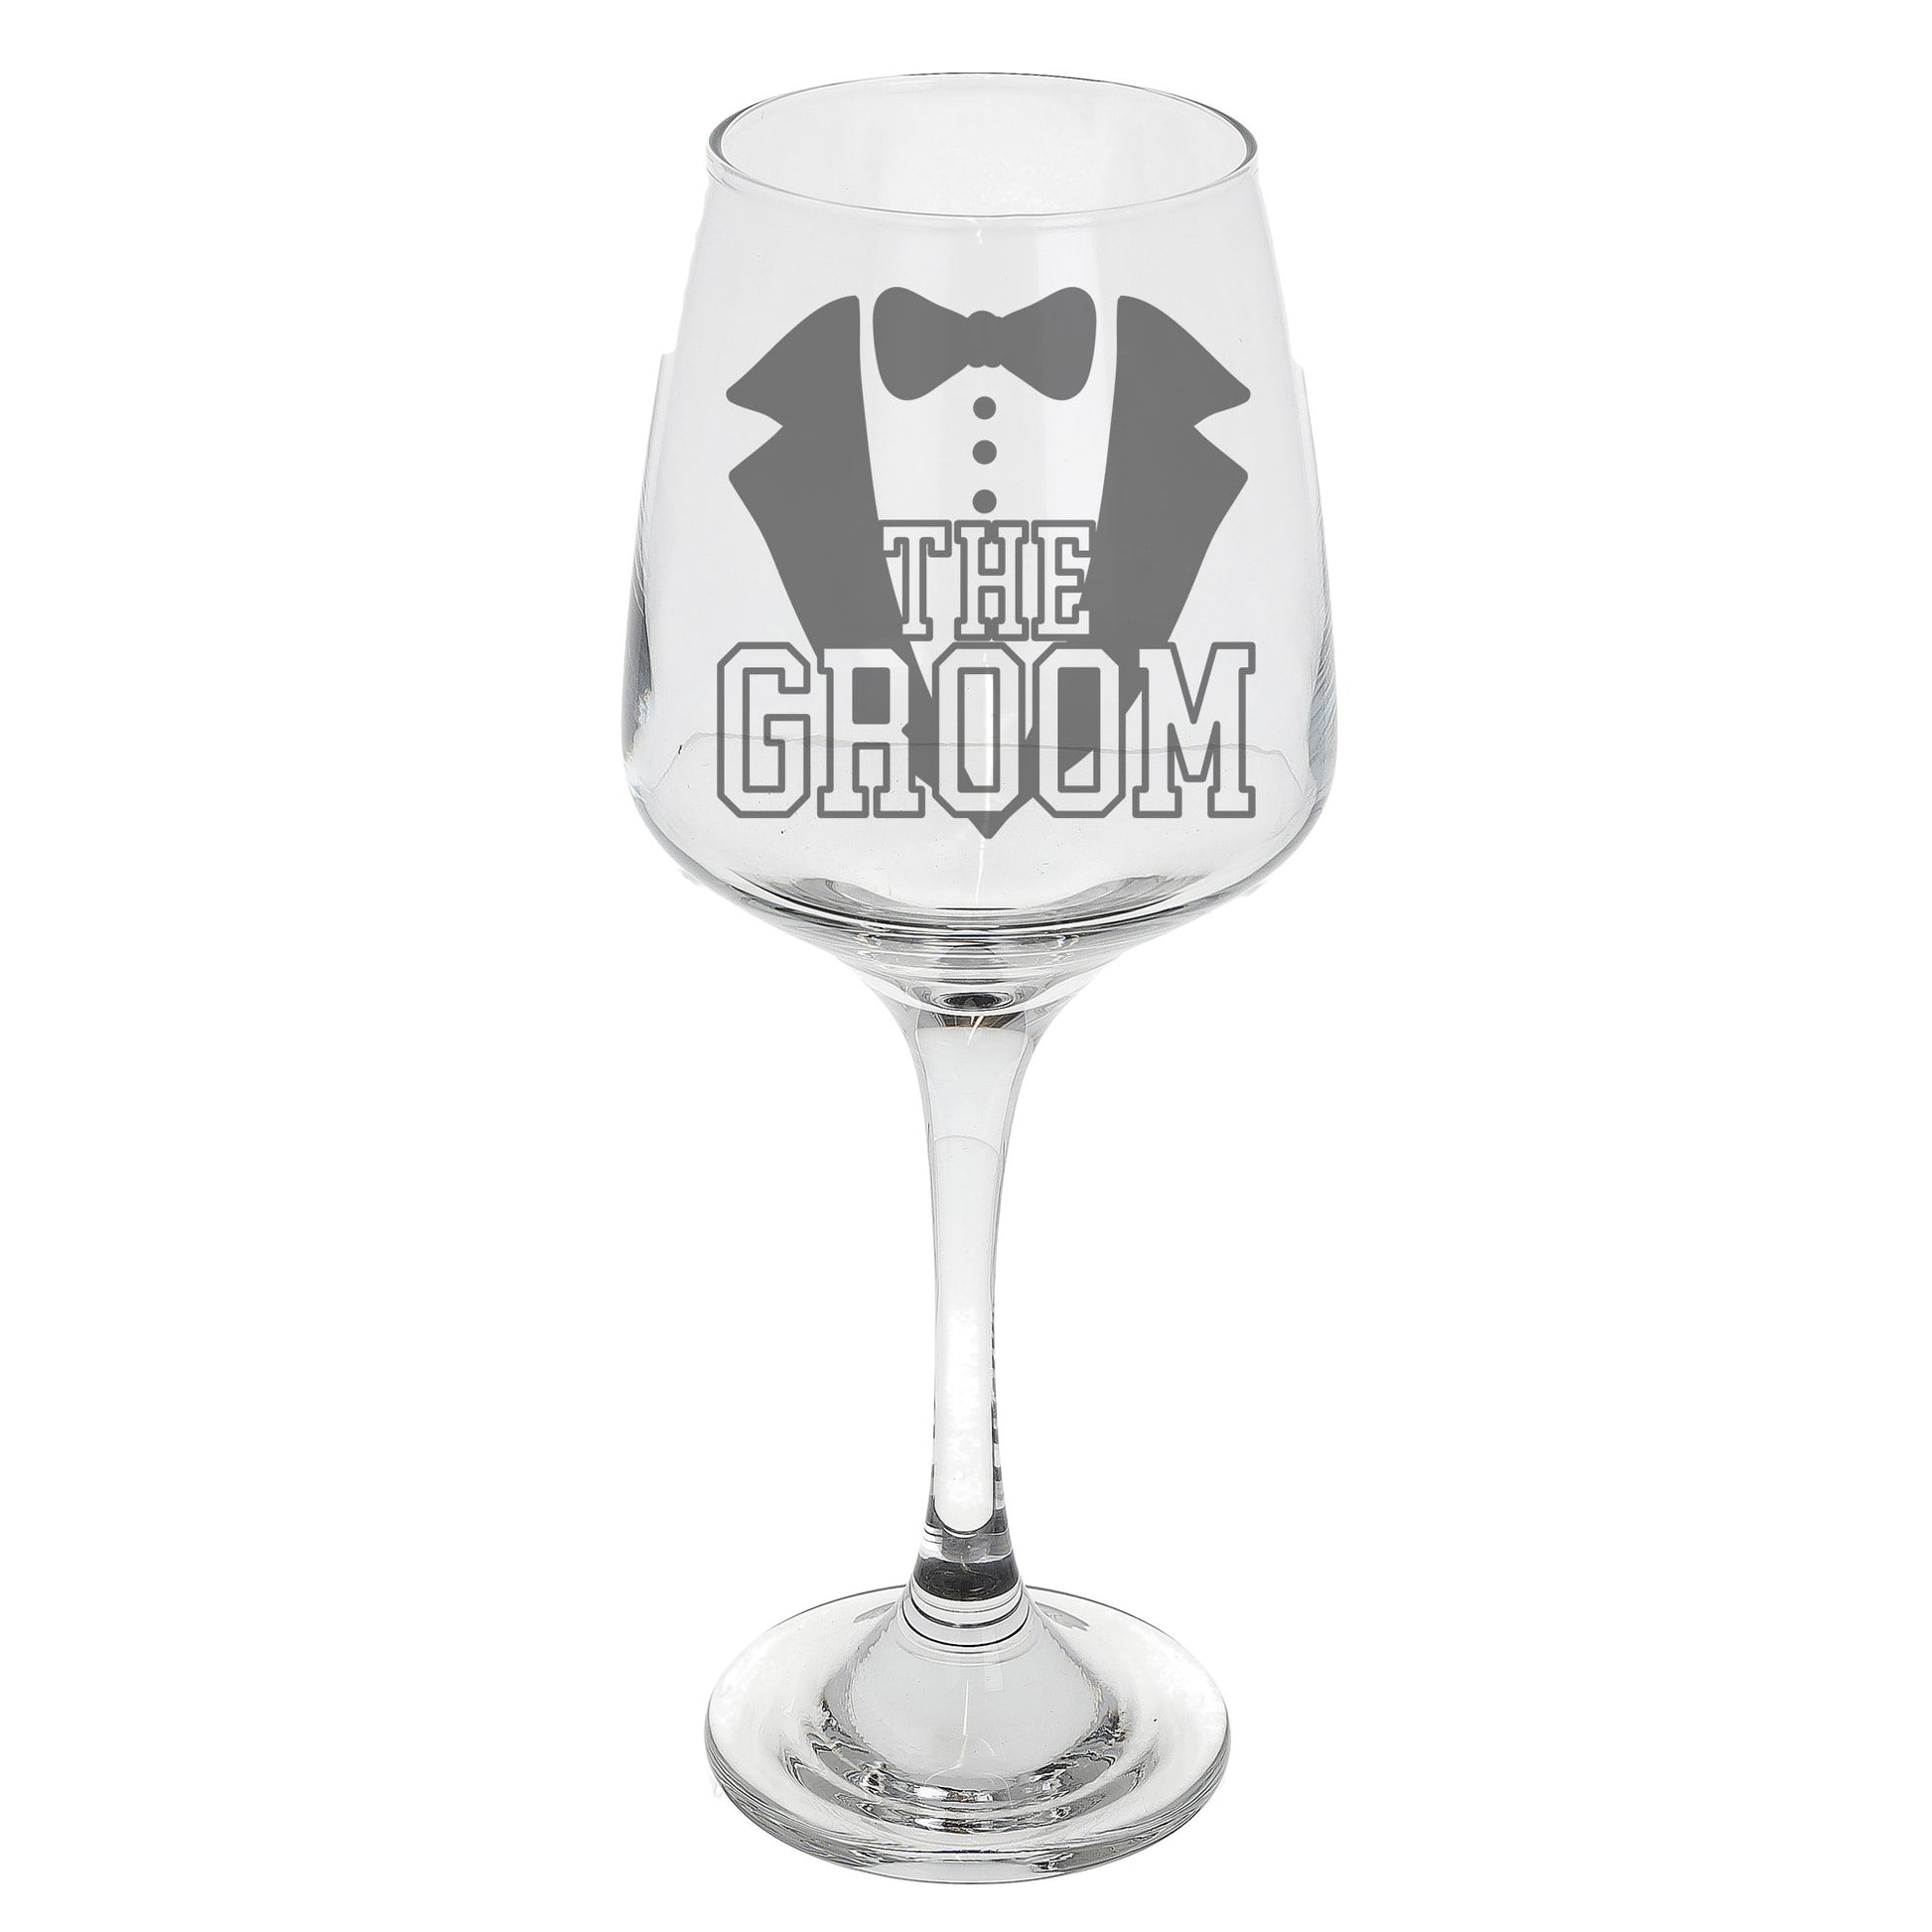 The Groom Engraved Wine Glass and/or Coaster Set  - Always Looking Good - Wine Glass Only  